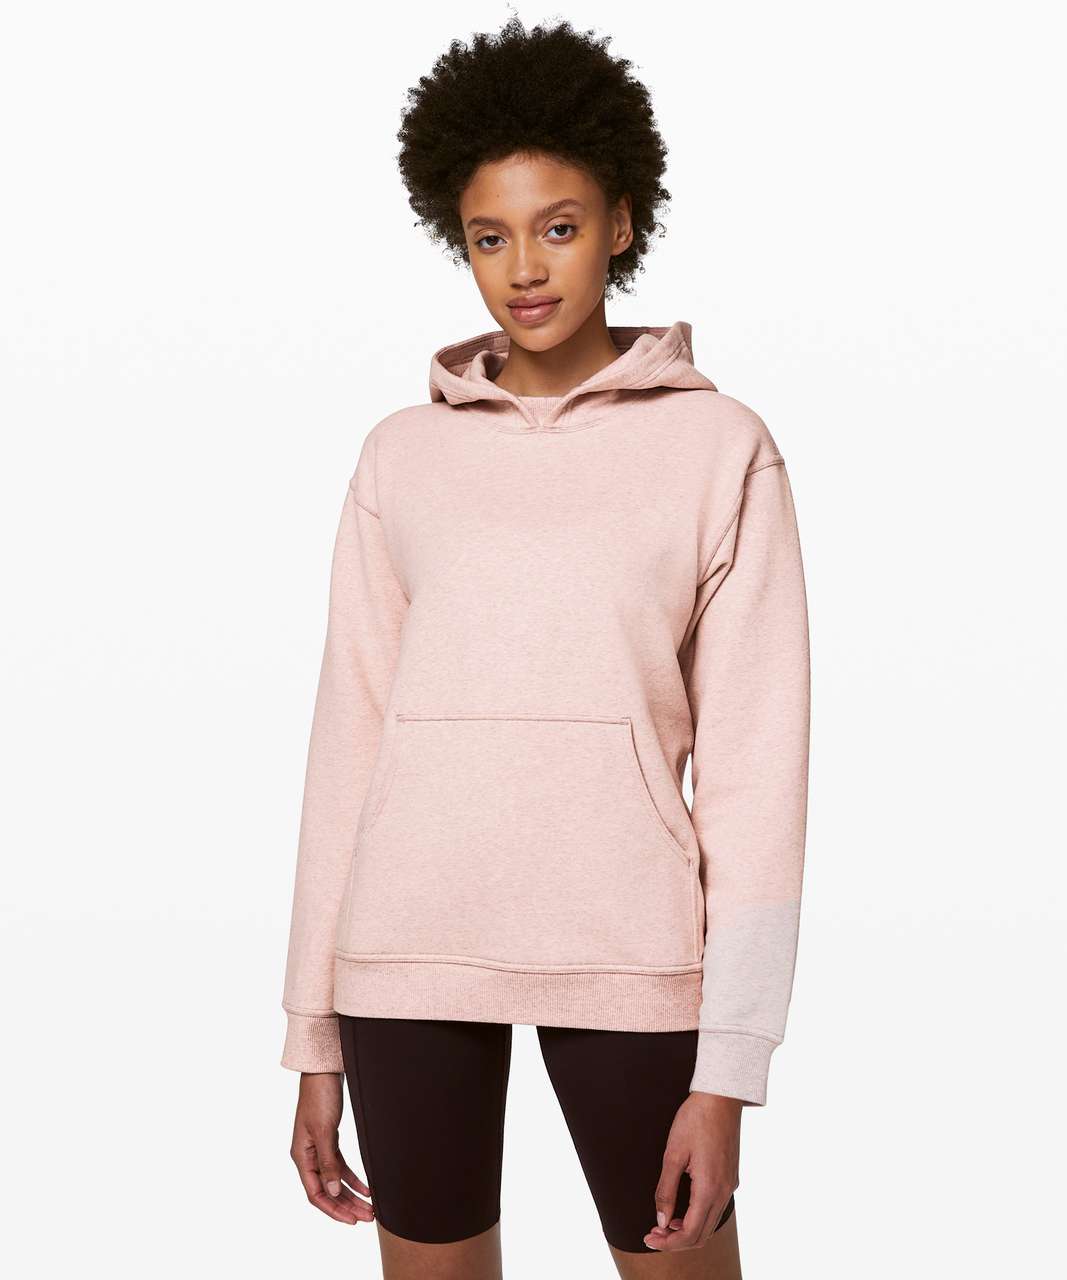 Lululemon All Yours Hoodie - Heathered Mink Berry / Mink Berry